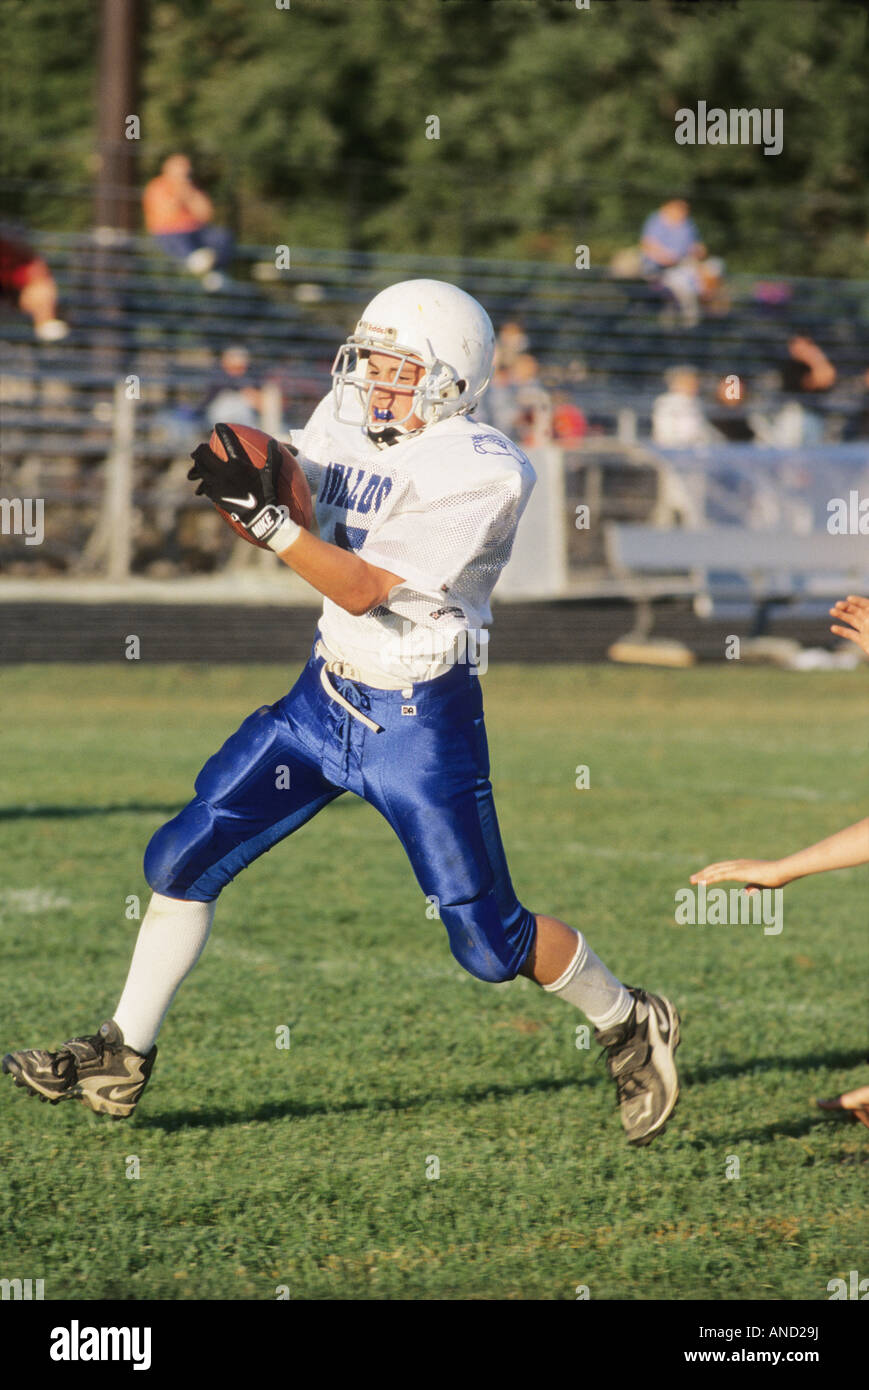 Junior high school football player runs with ball during game American Football Ohio USA sports safety equipment Stock Photo